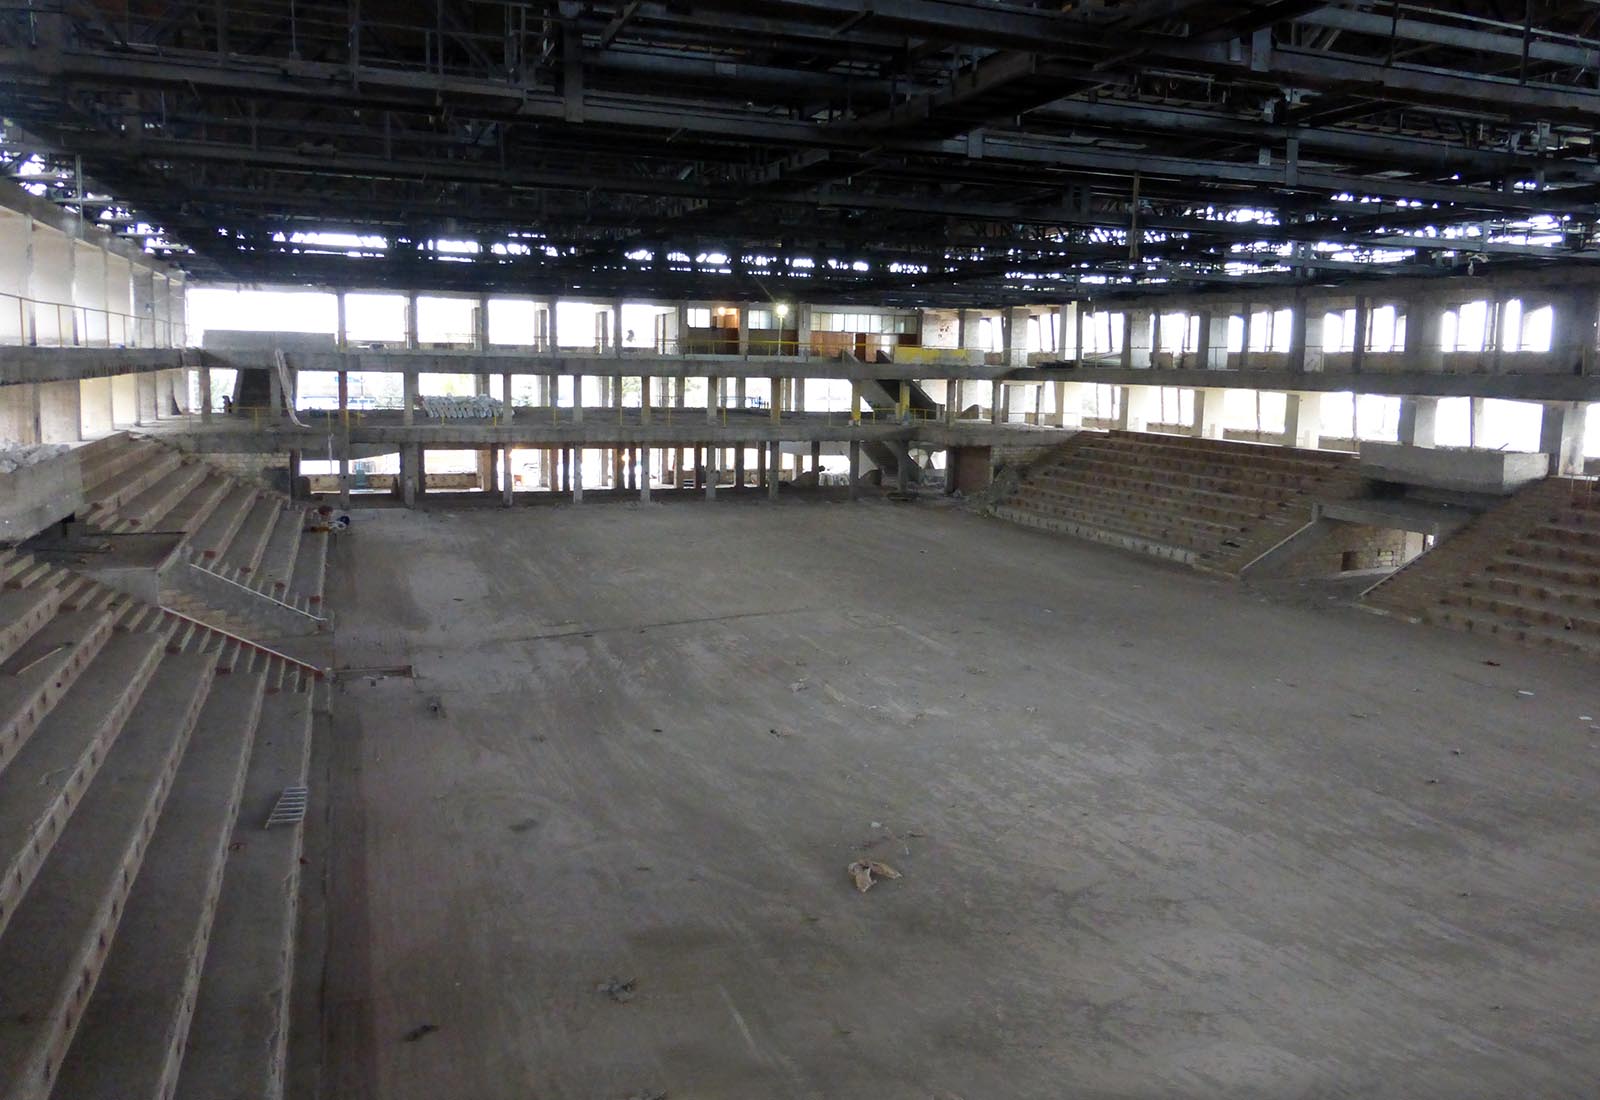 Baku sport hall - The play area after the demolitions